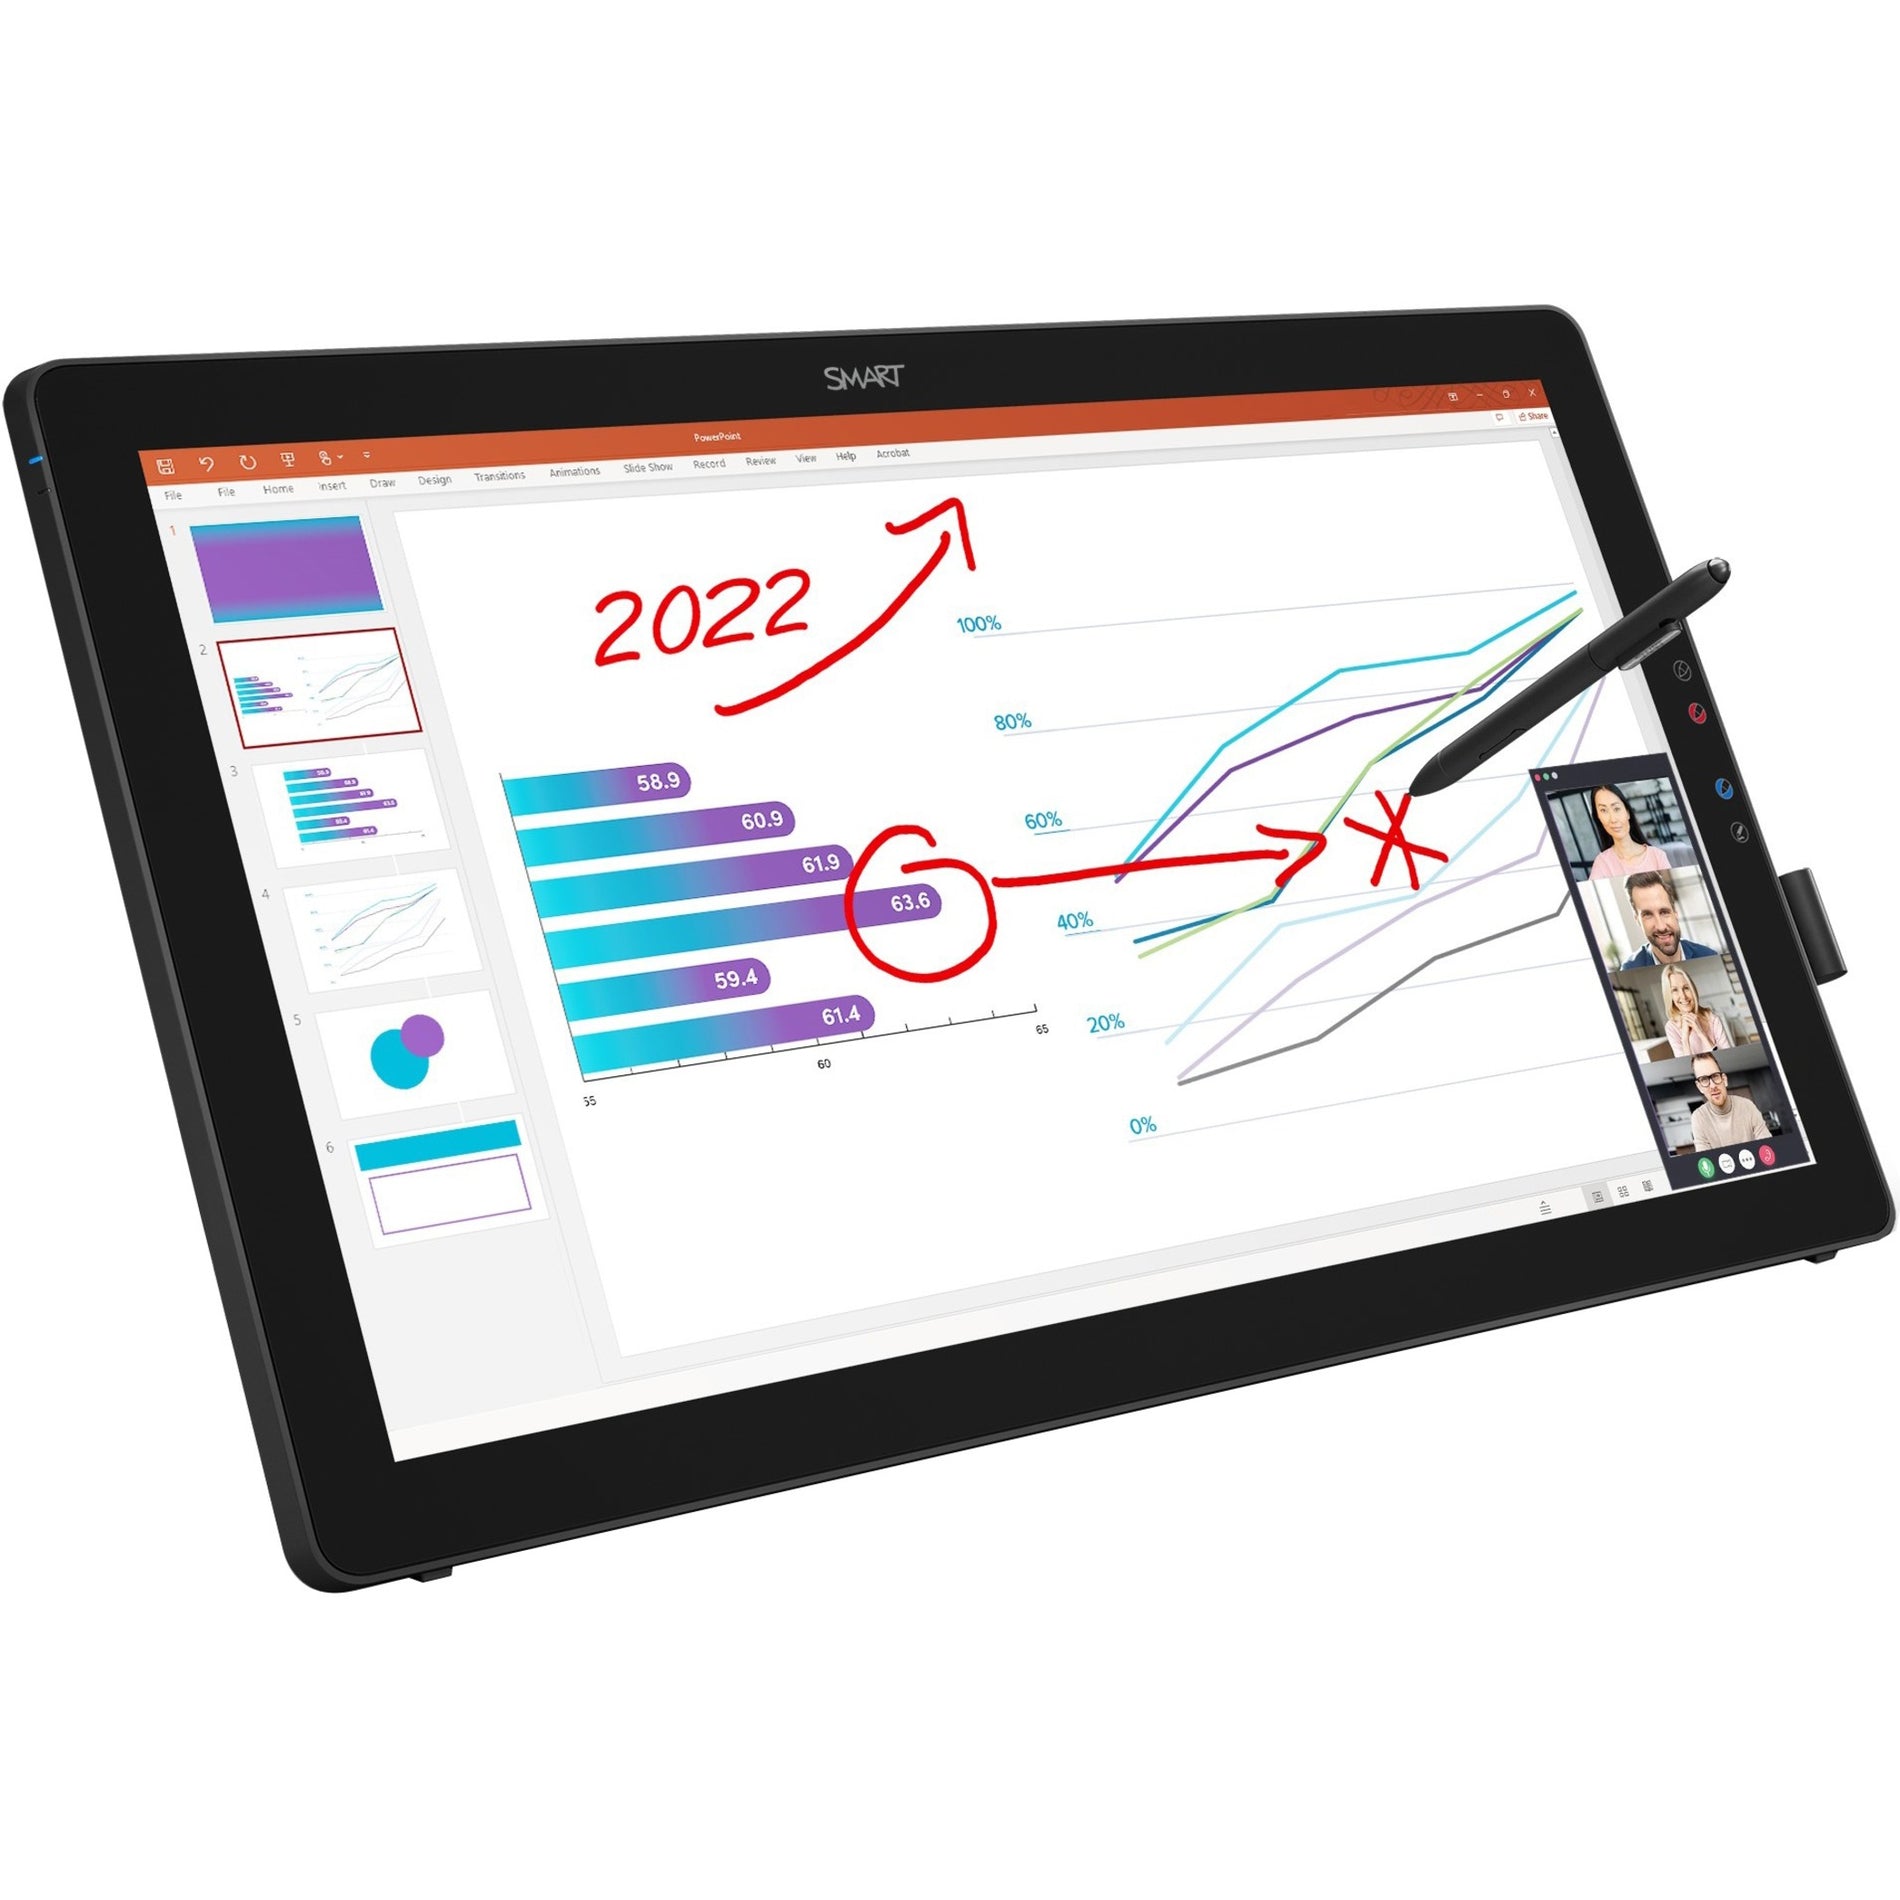 SMART SP624 Podium Interactive Pen Display - Collaborate and Create with Ease